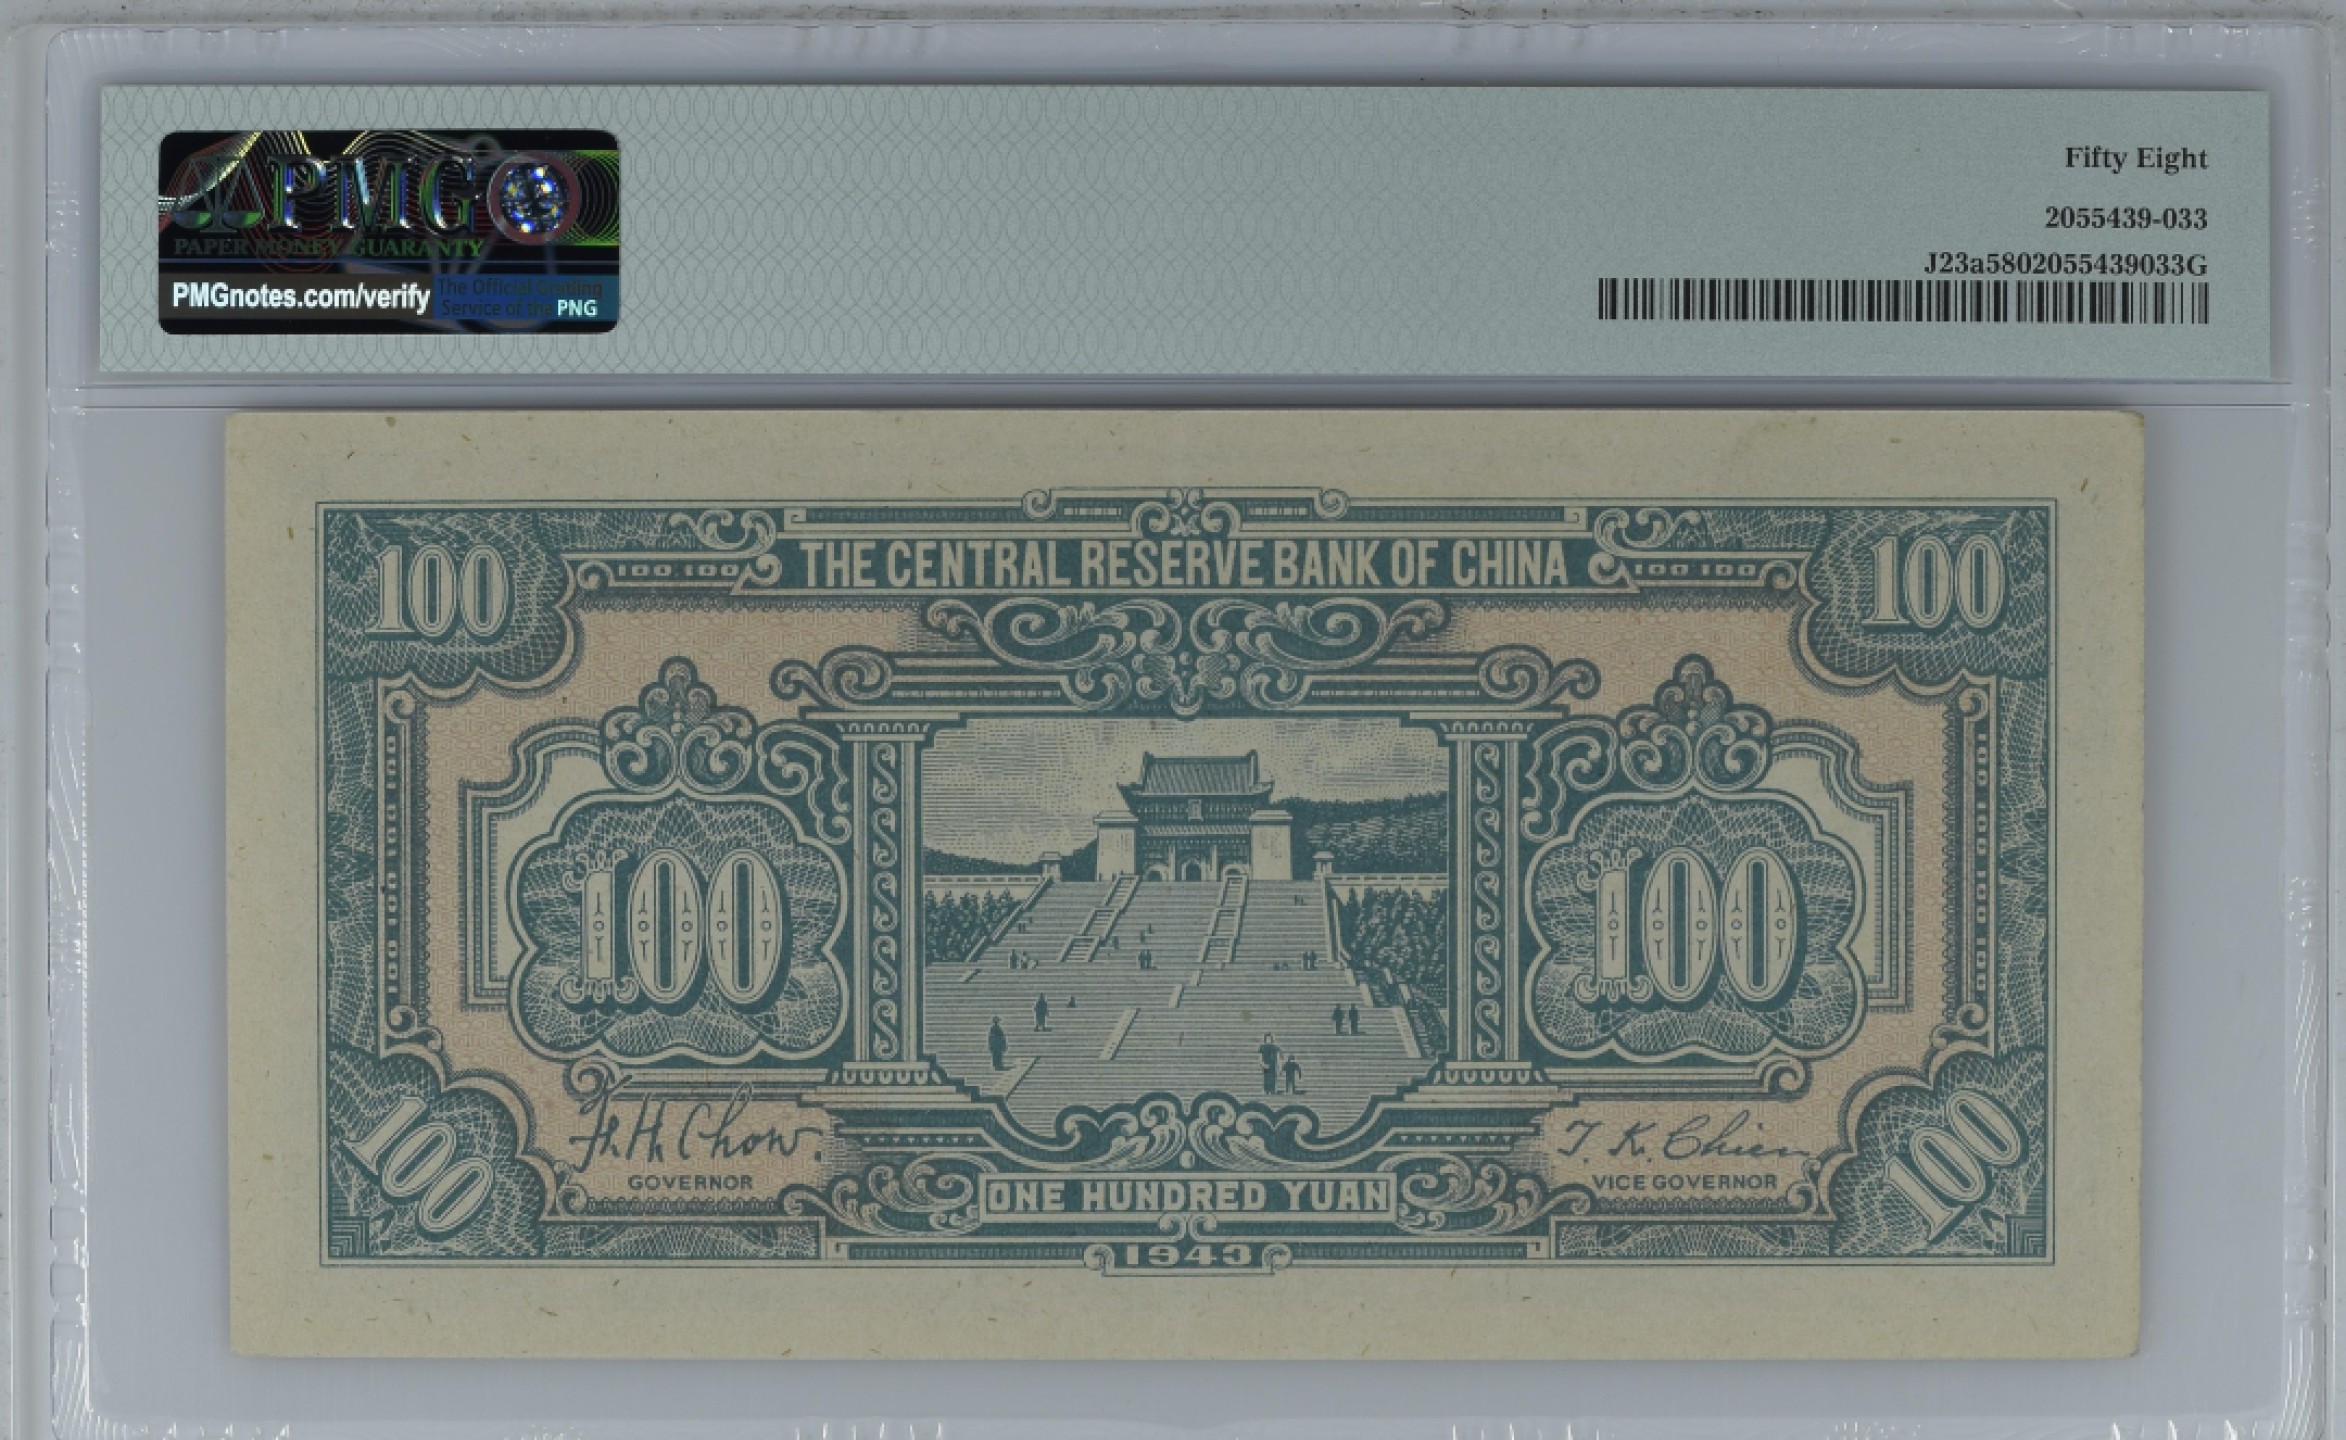 World Banknote Grading AUSTRIA《National Bank》1000 Schilling【1983】『PMG  Grading About Uncirculated 55